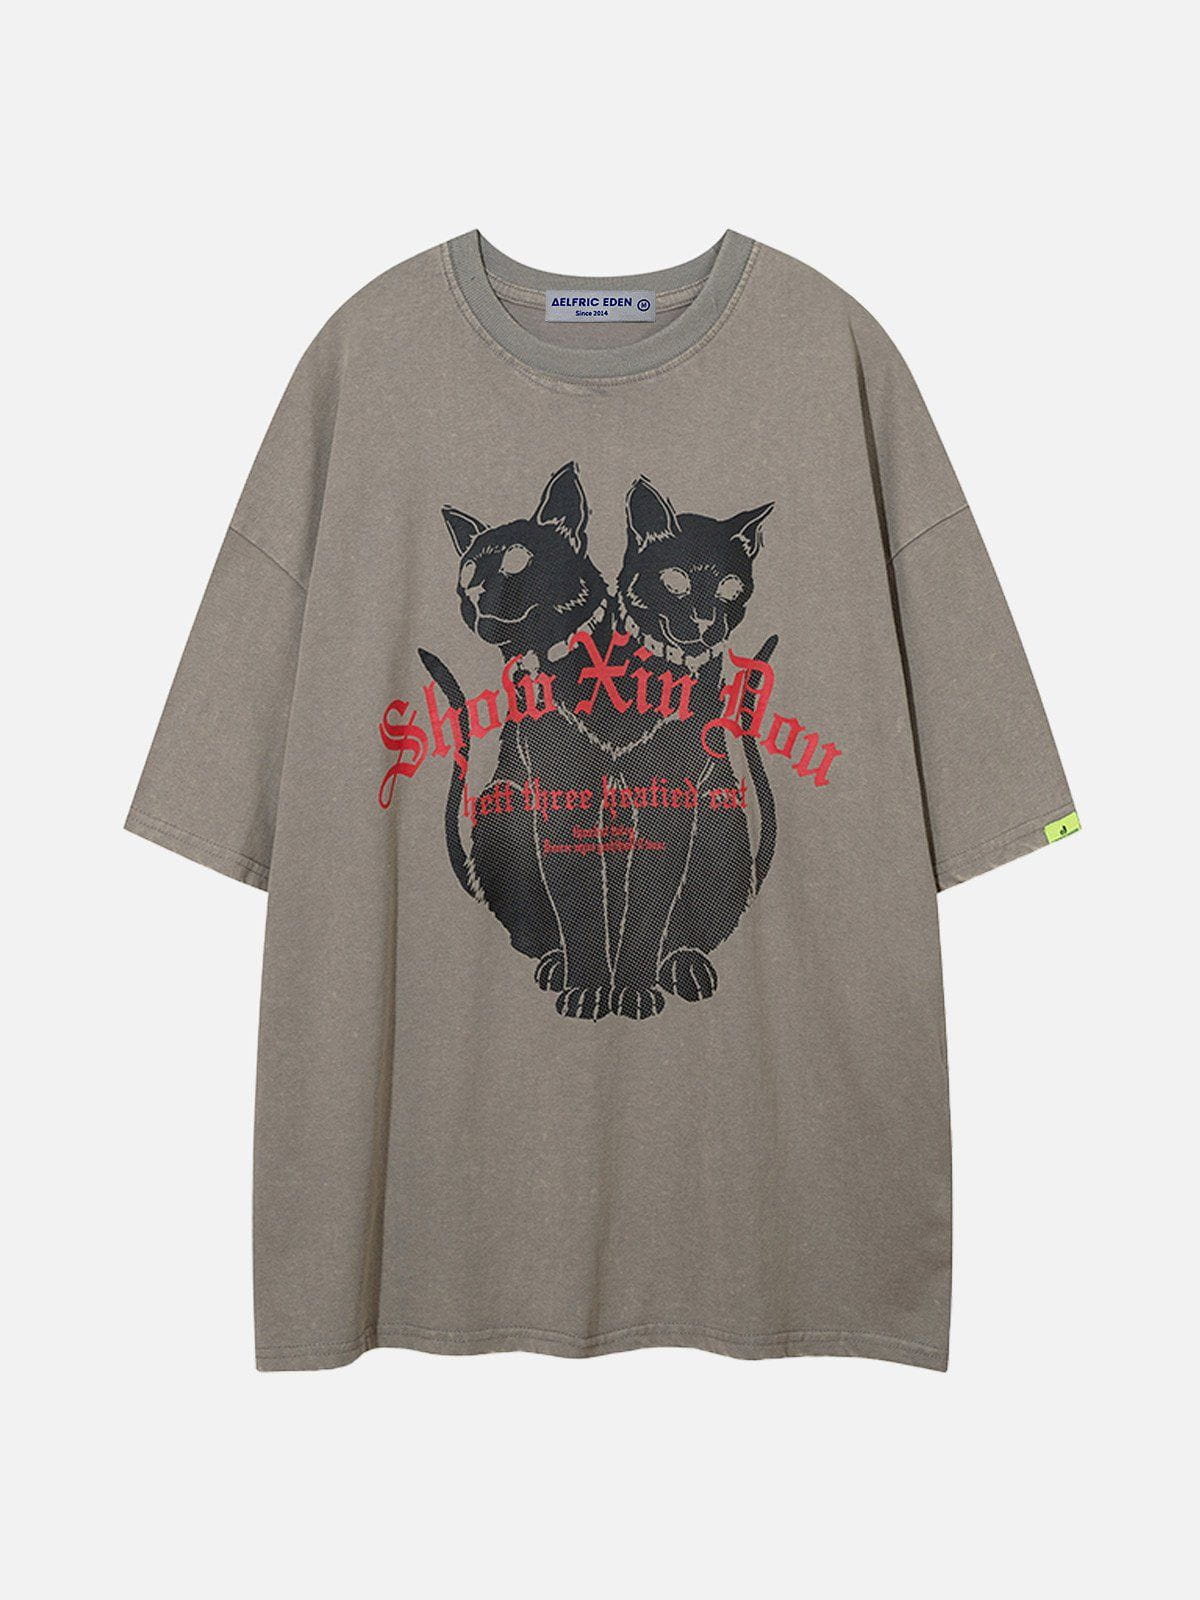 WLS Abstract Two-Headed Cat Print Tee